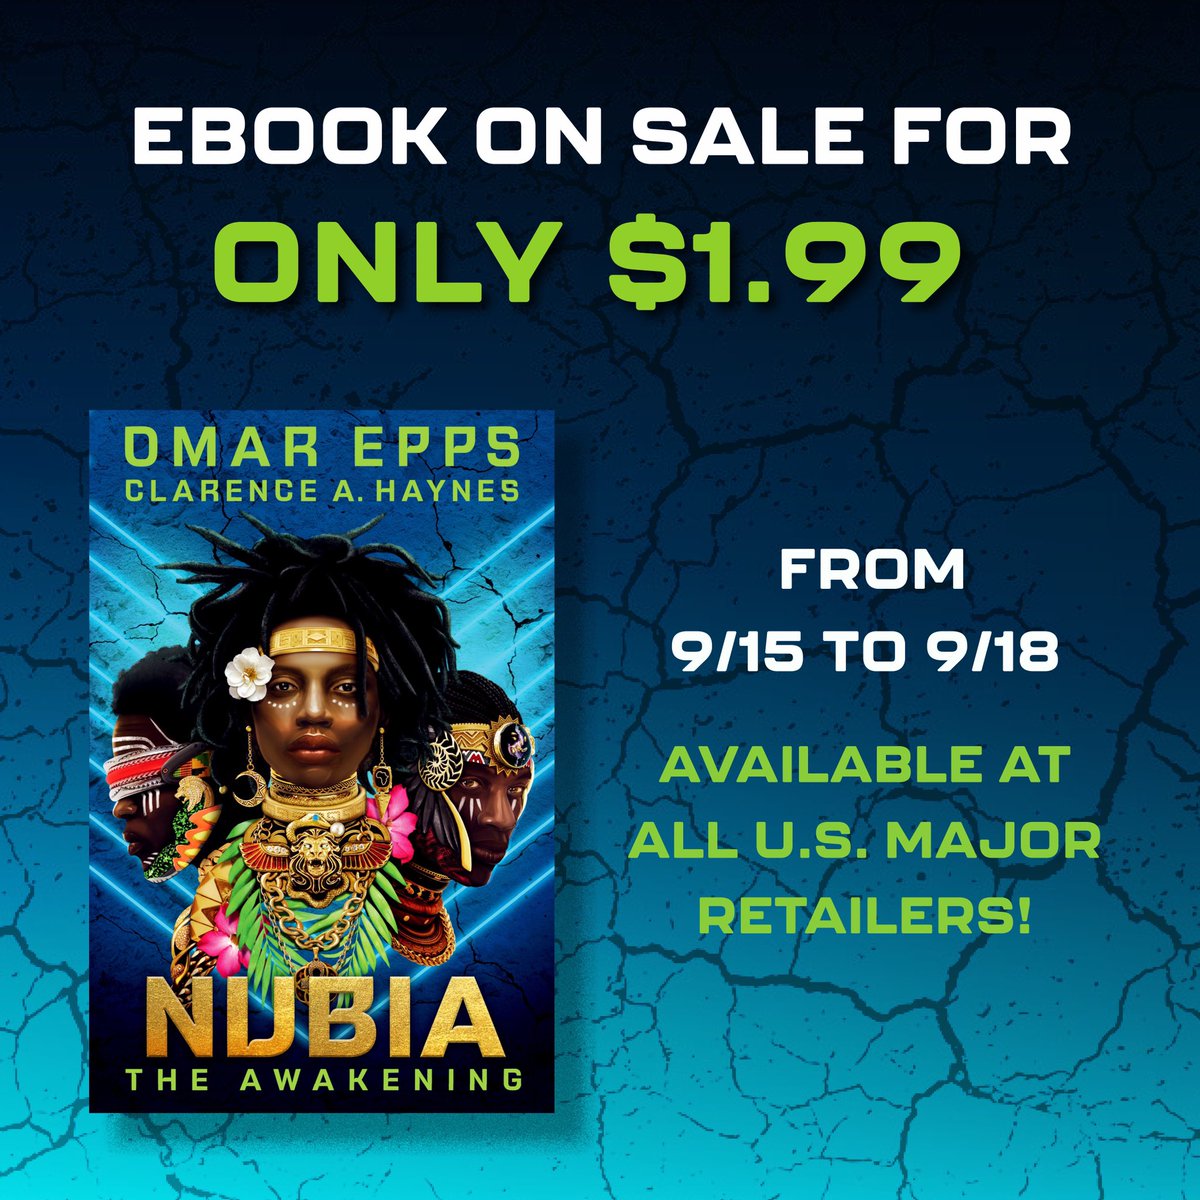 We love a good sale… eBook of #NubiaTheAwakening now available at a phenomenal price through Monday, 9/18. Available in the U.S., wherever you buy your eBooks.✨✨✨✨ an @omarepps @AevitasCreative @GetUnderlined title

Special shout out and thanks to @BookBub